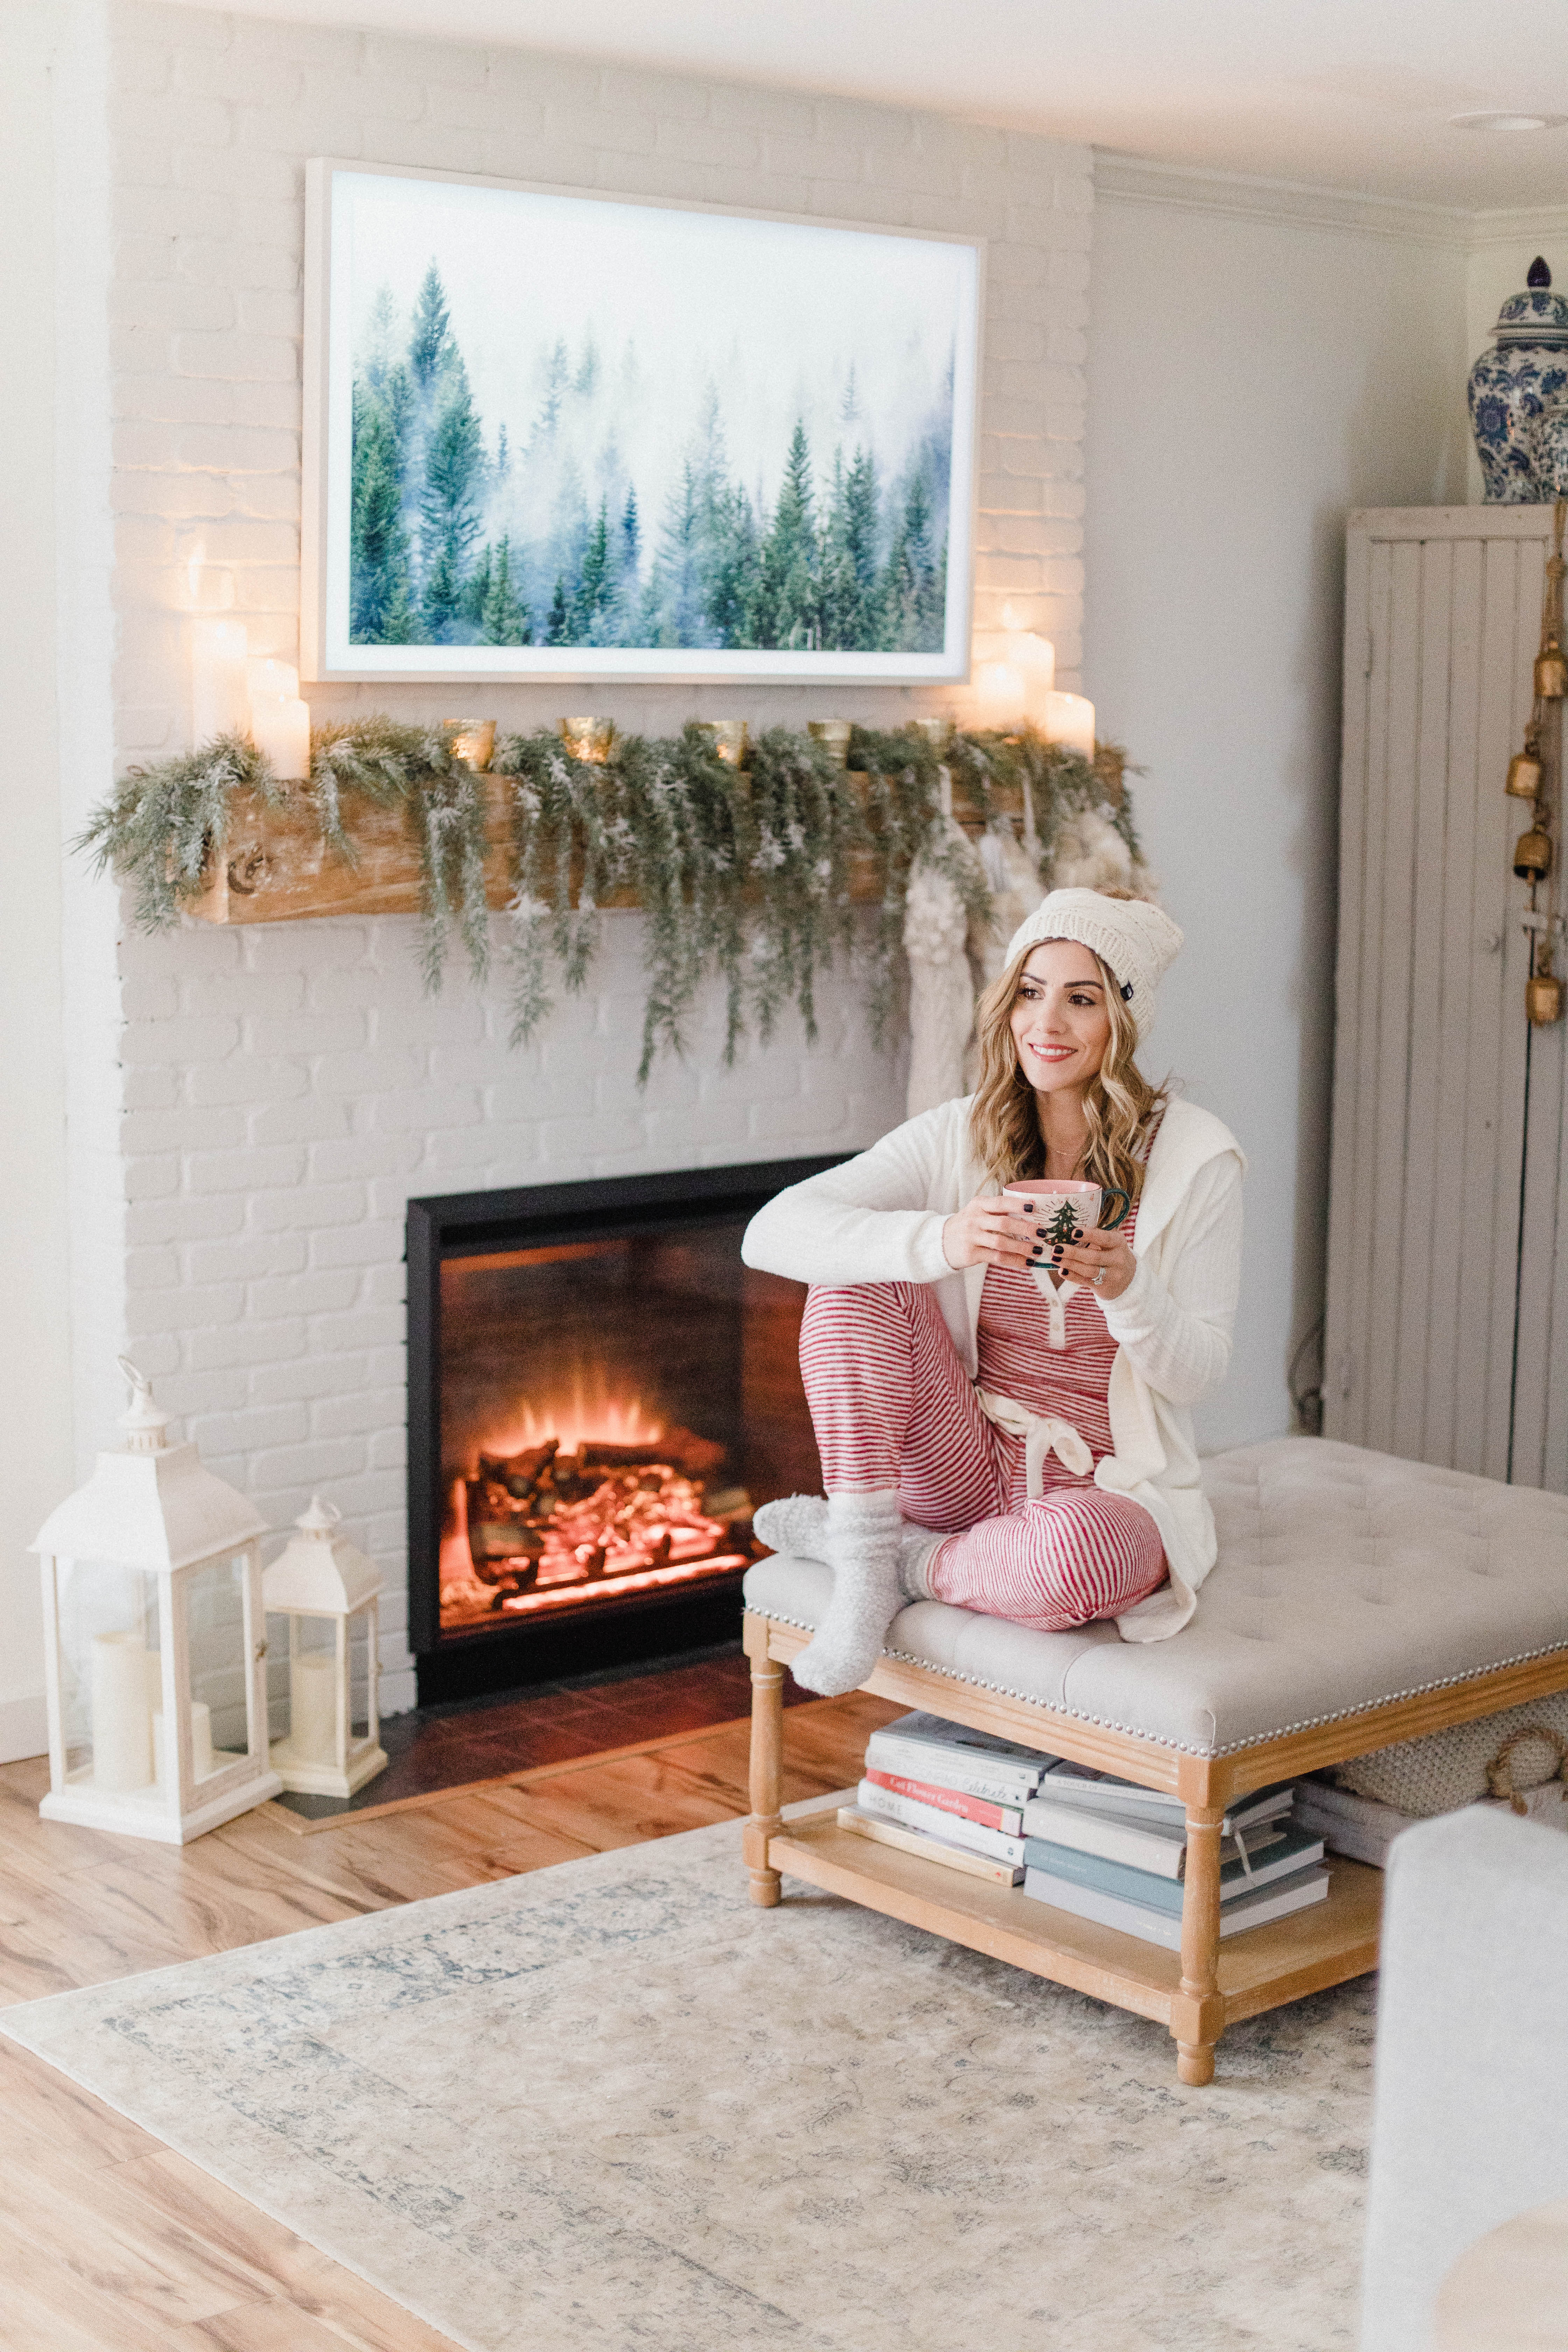 Connecticut life and style blogger Lauren McBride shares the gift of Barefoot Dreams with this cardigan under $80 available on QVC.